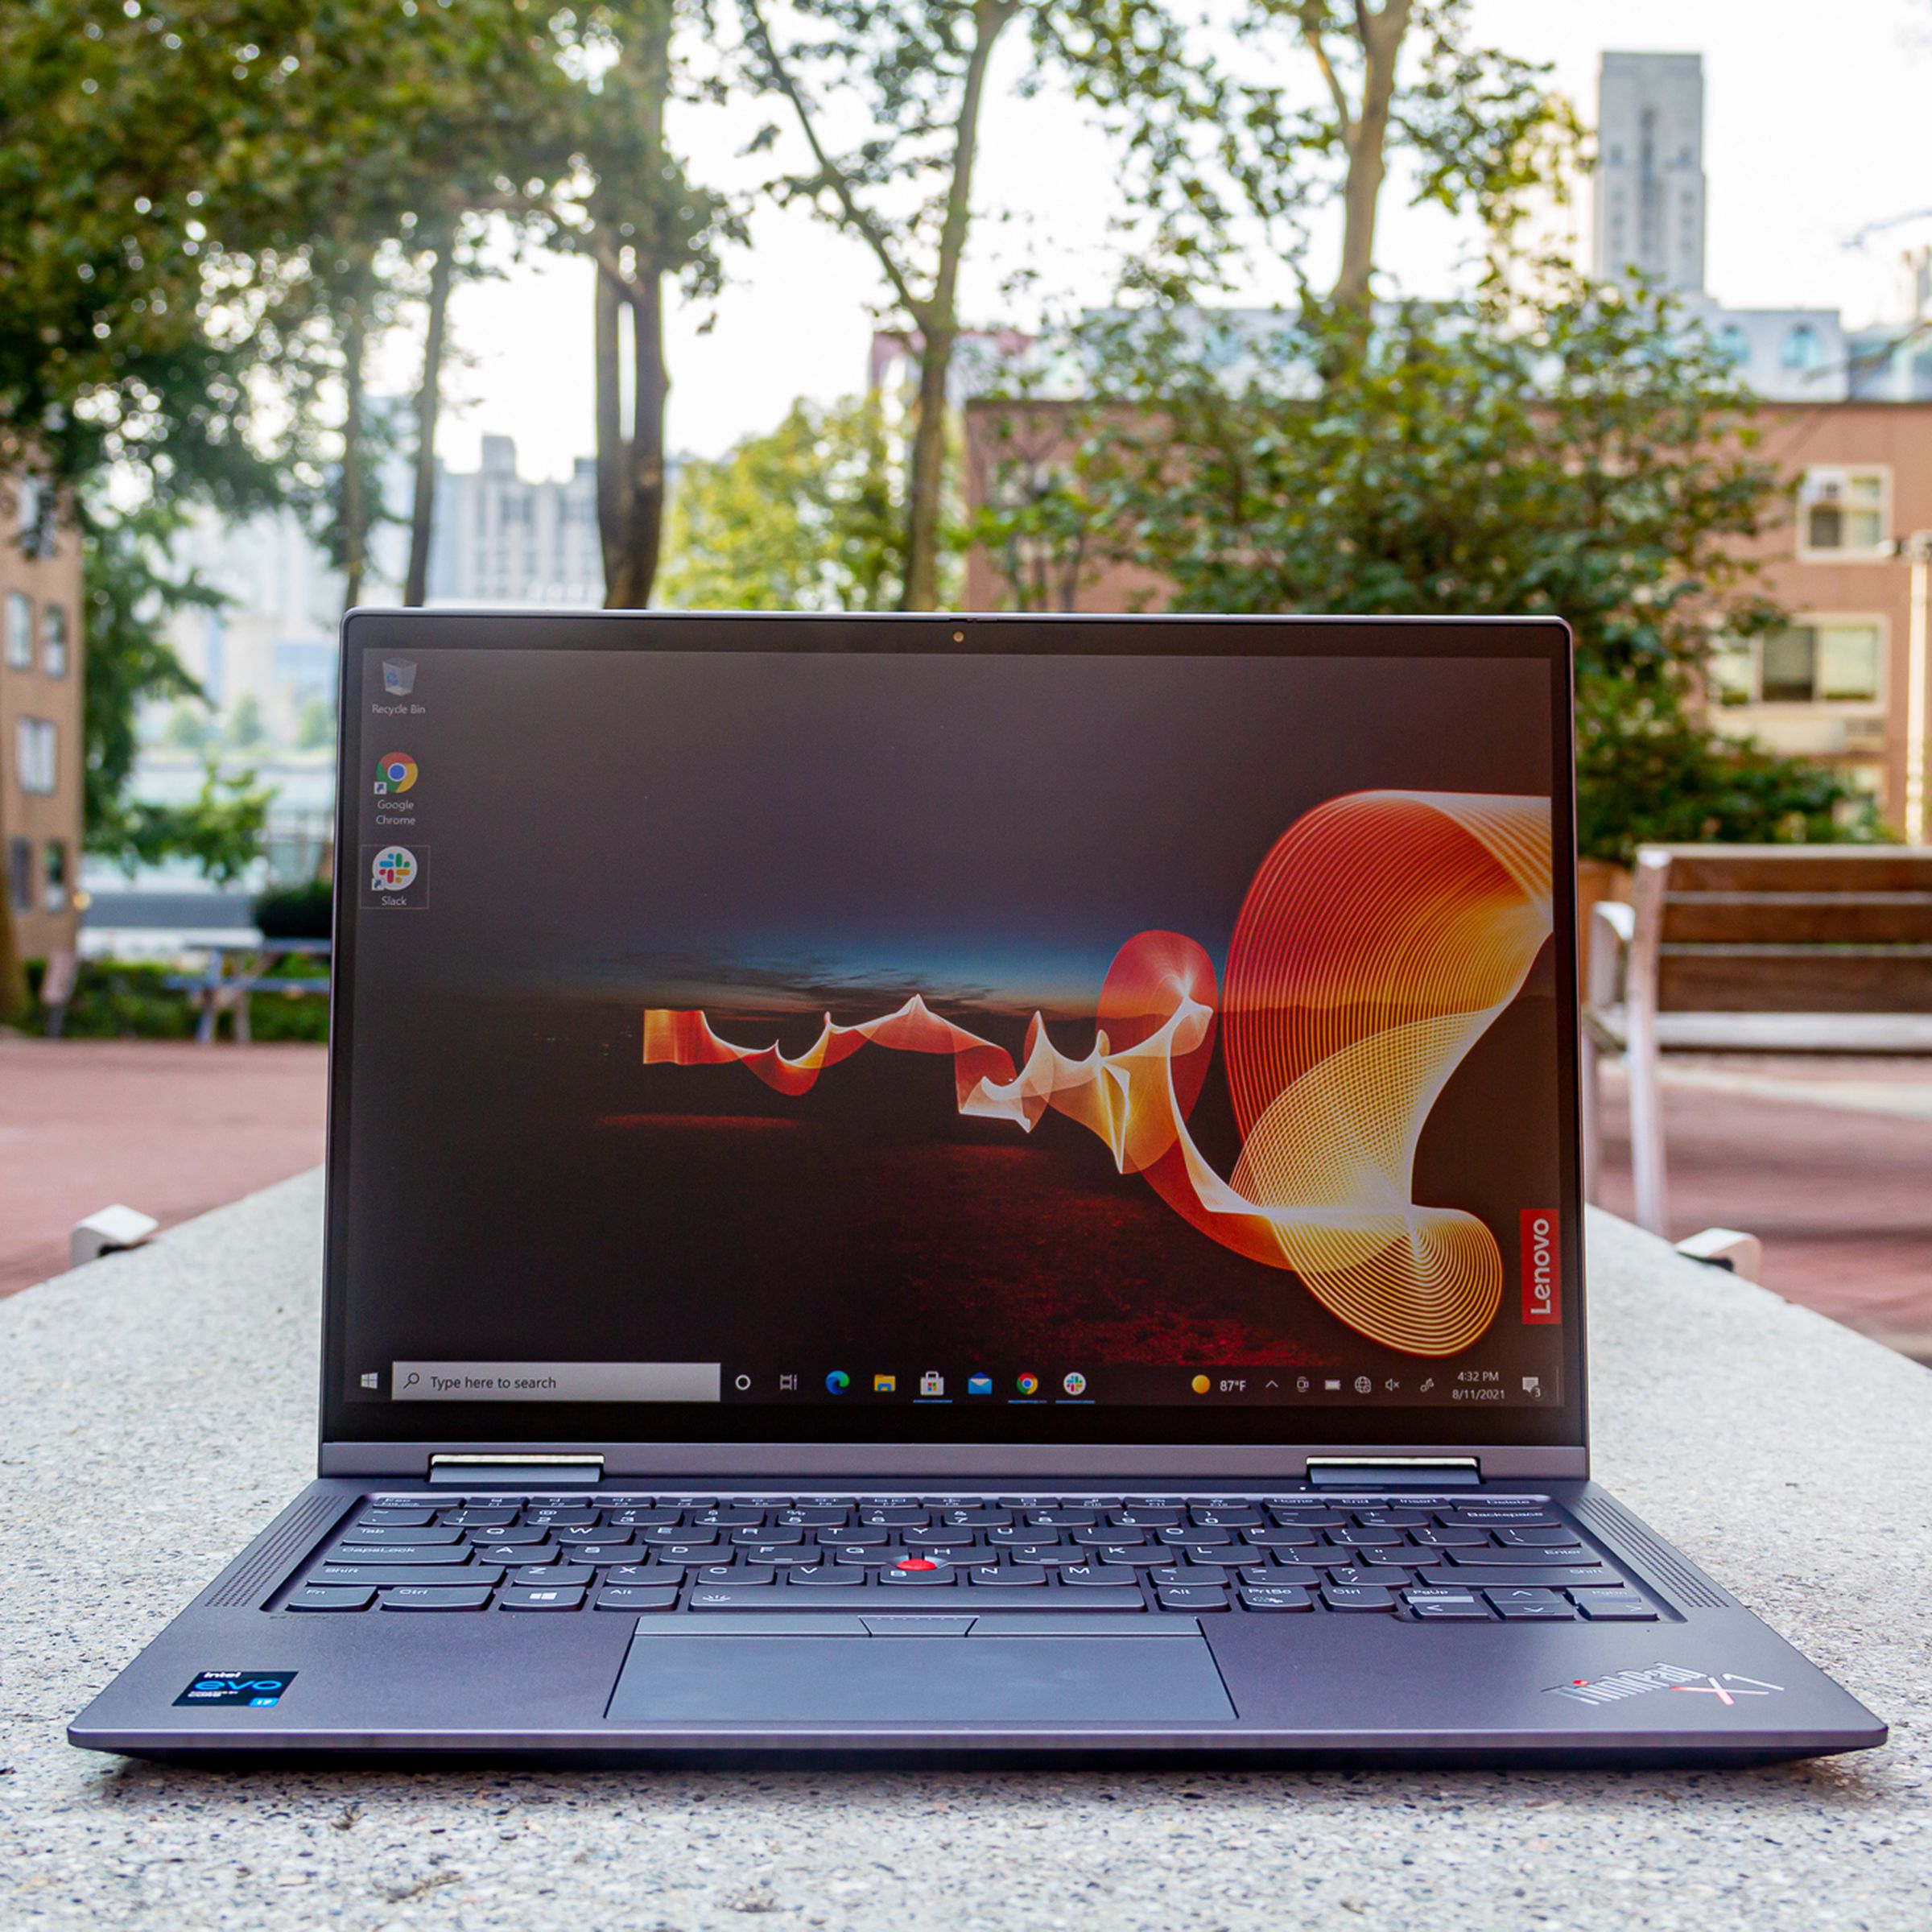 The ThinkPad X1 Yoga Gen 6 on a bench in an outdoor park, open. The screen displays an outdoor night scene with an orange banner rippling across it and the Lenovo banner on the bottom right side.